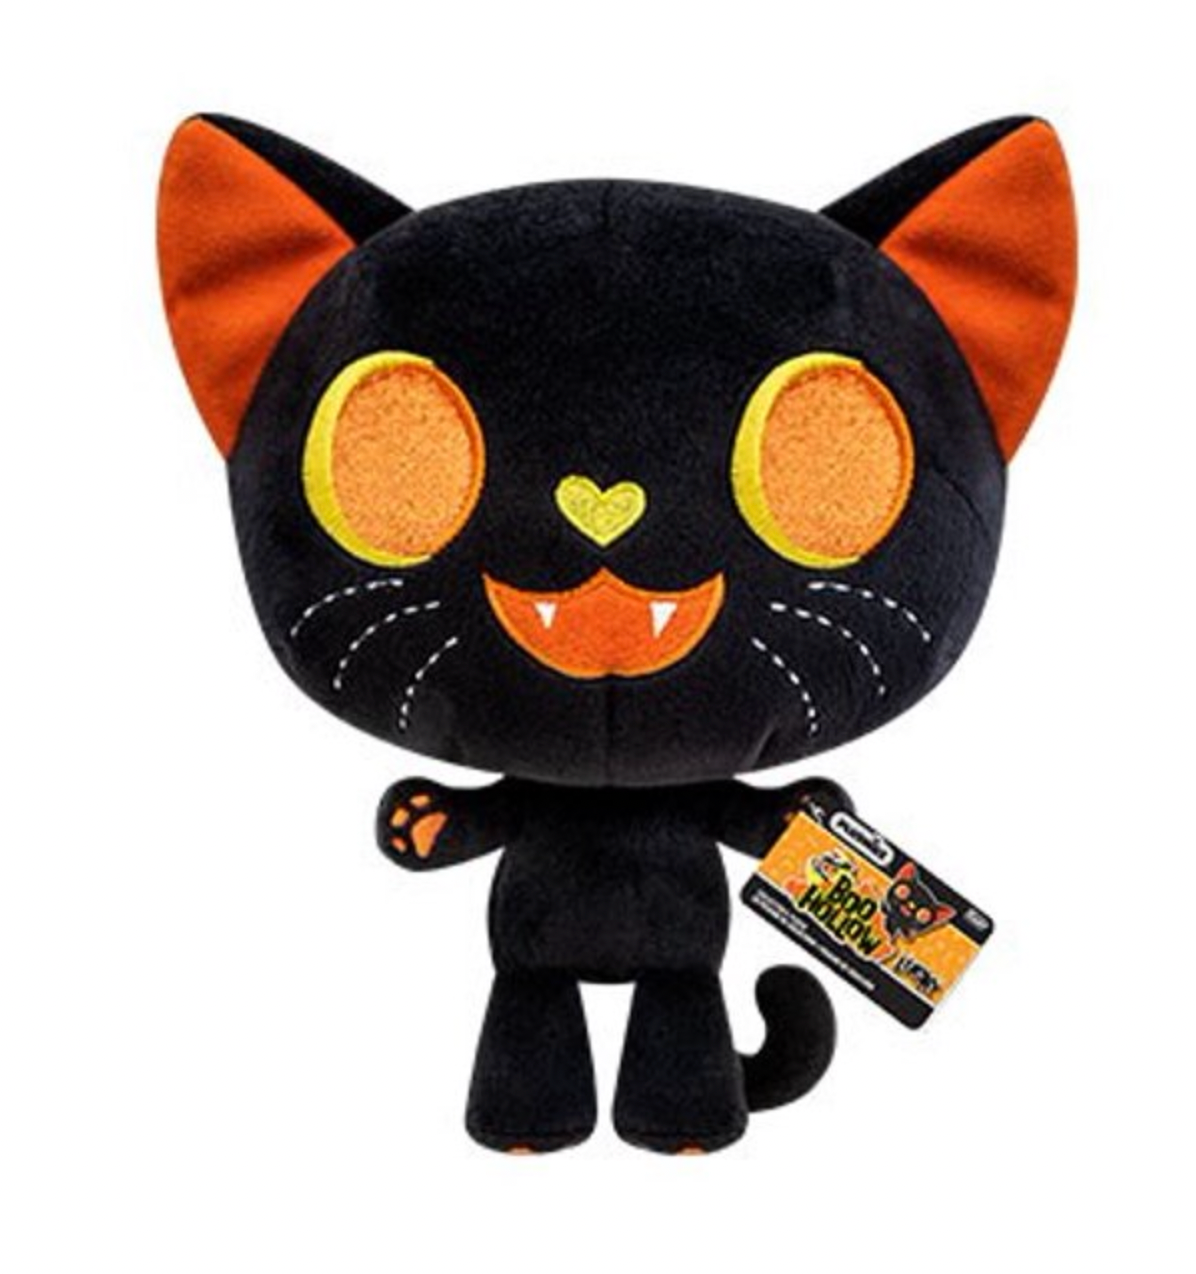 Funko Halloween Plush Boo Hollow Lucky New with Tags